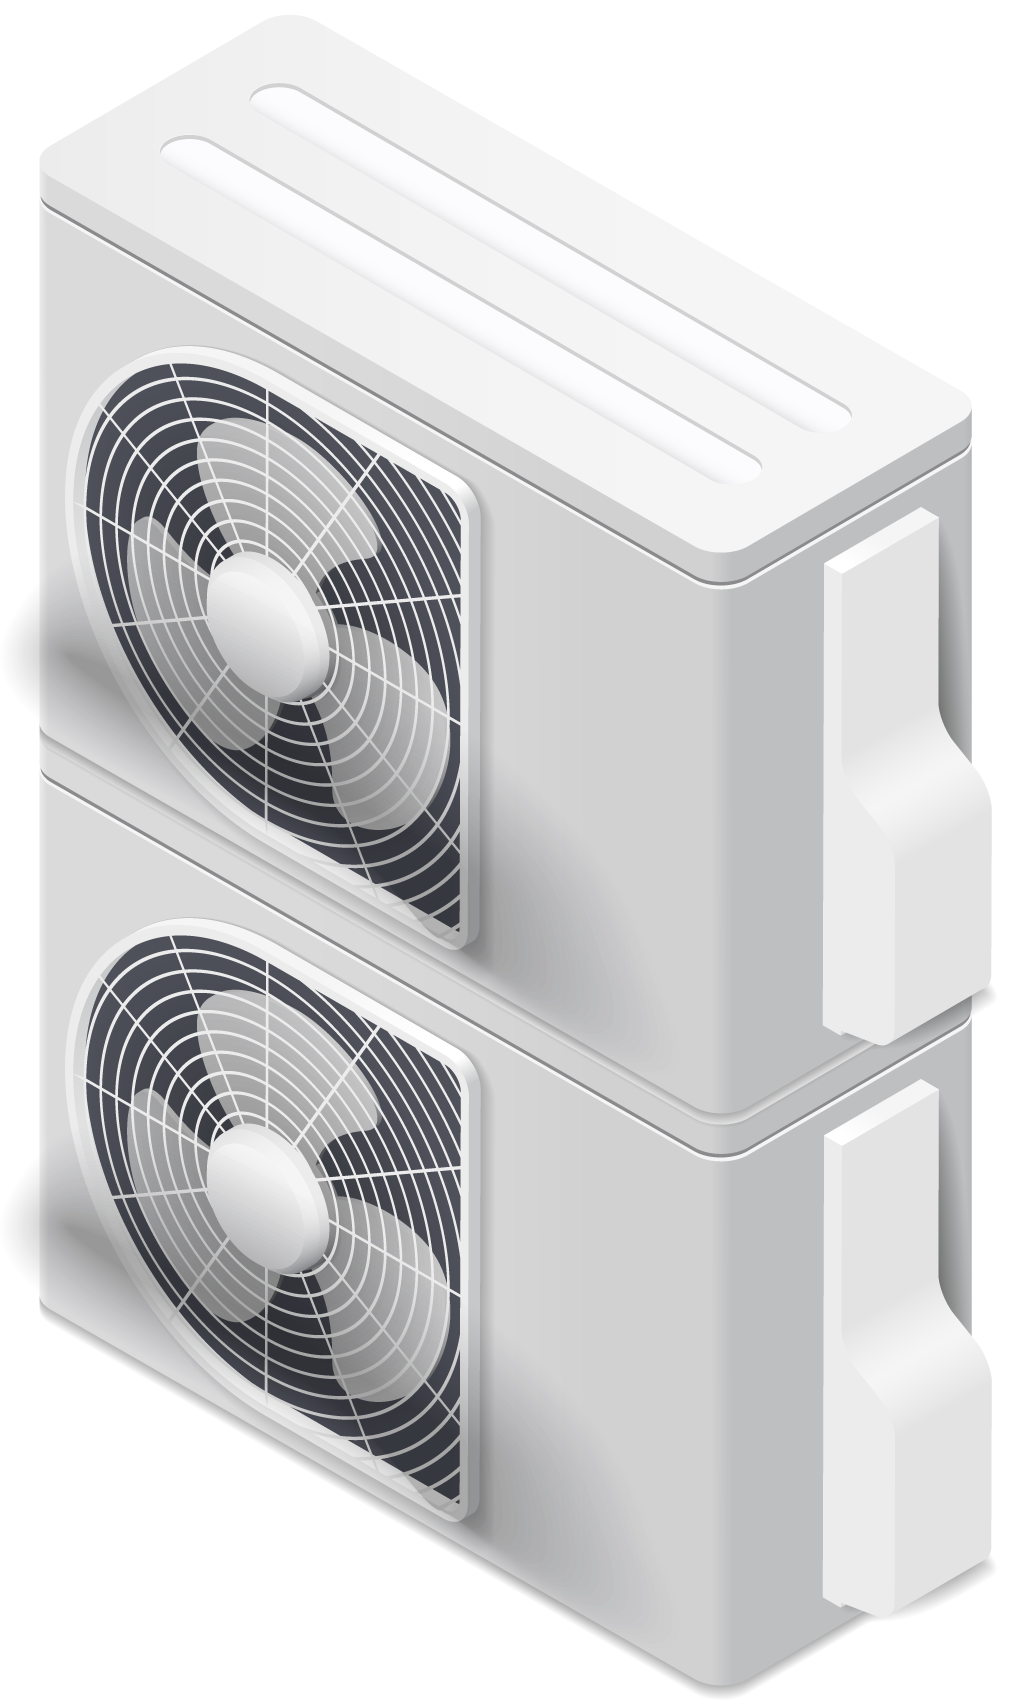 How dual heat pump systems work